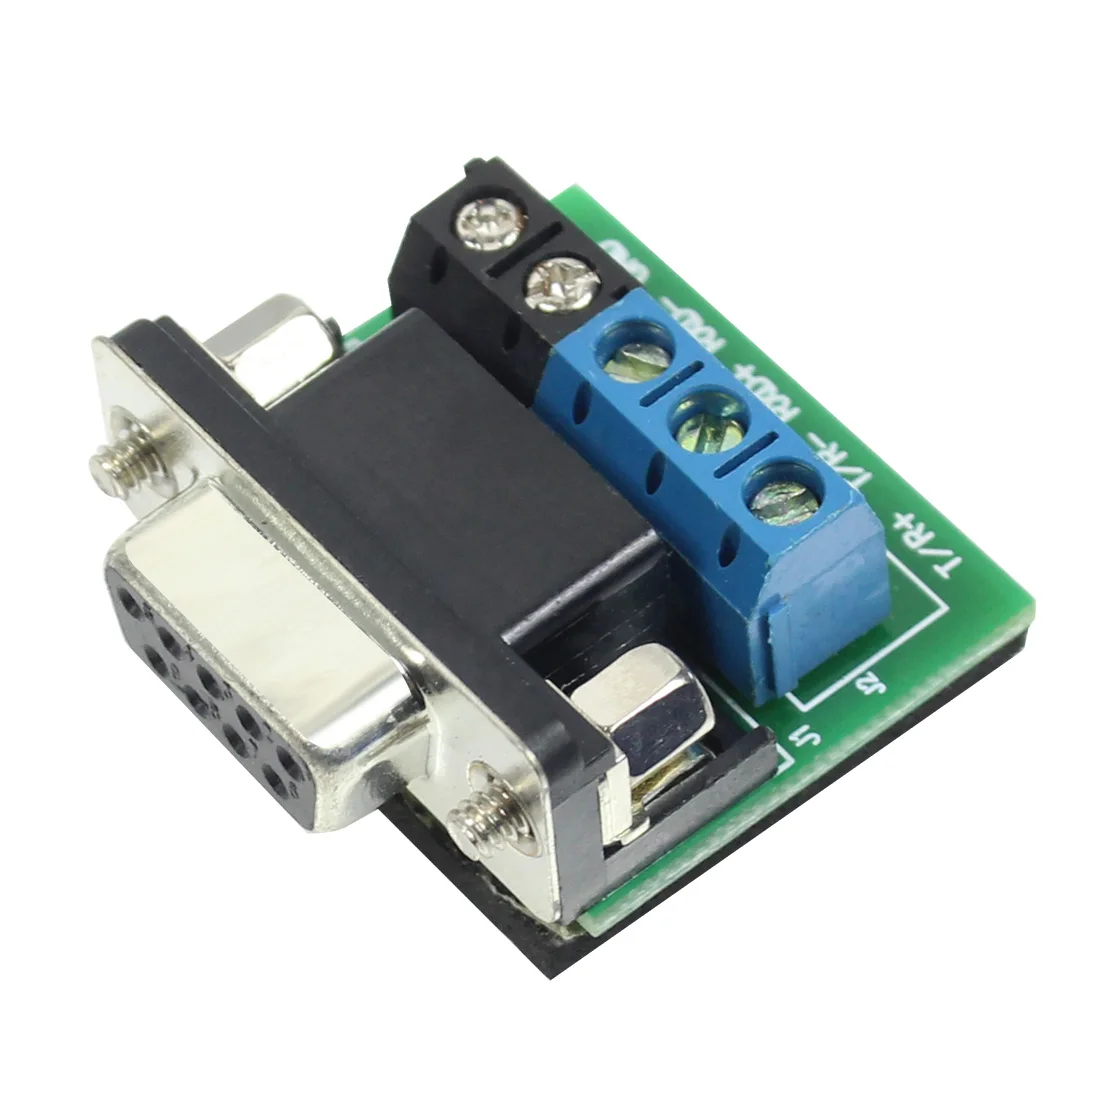 

USB 2.0 to RS-485/422/232 DB9 COM Serial Cable Converter Adapter FTDI Chip Industrial 400W Lightning Protection 70cm